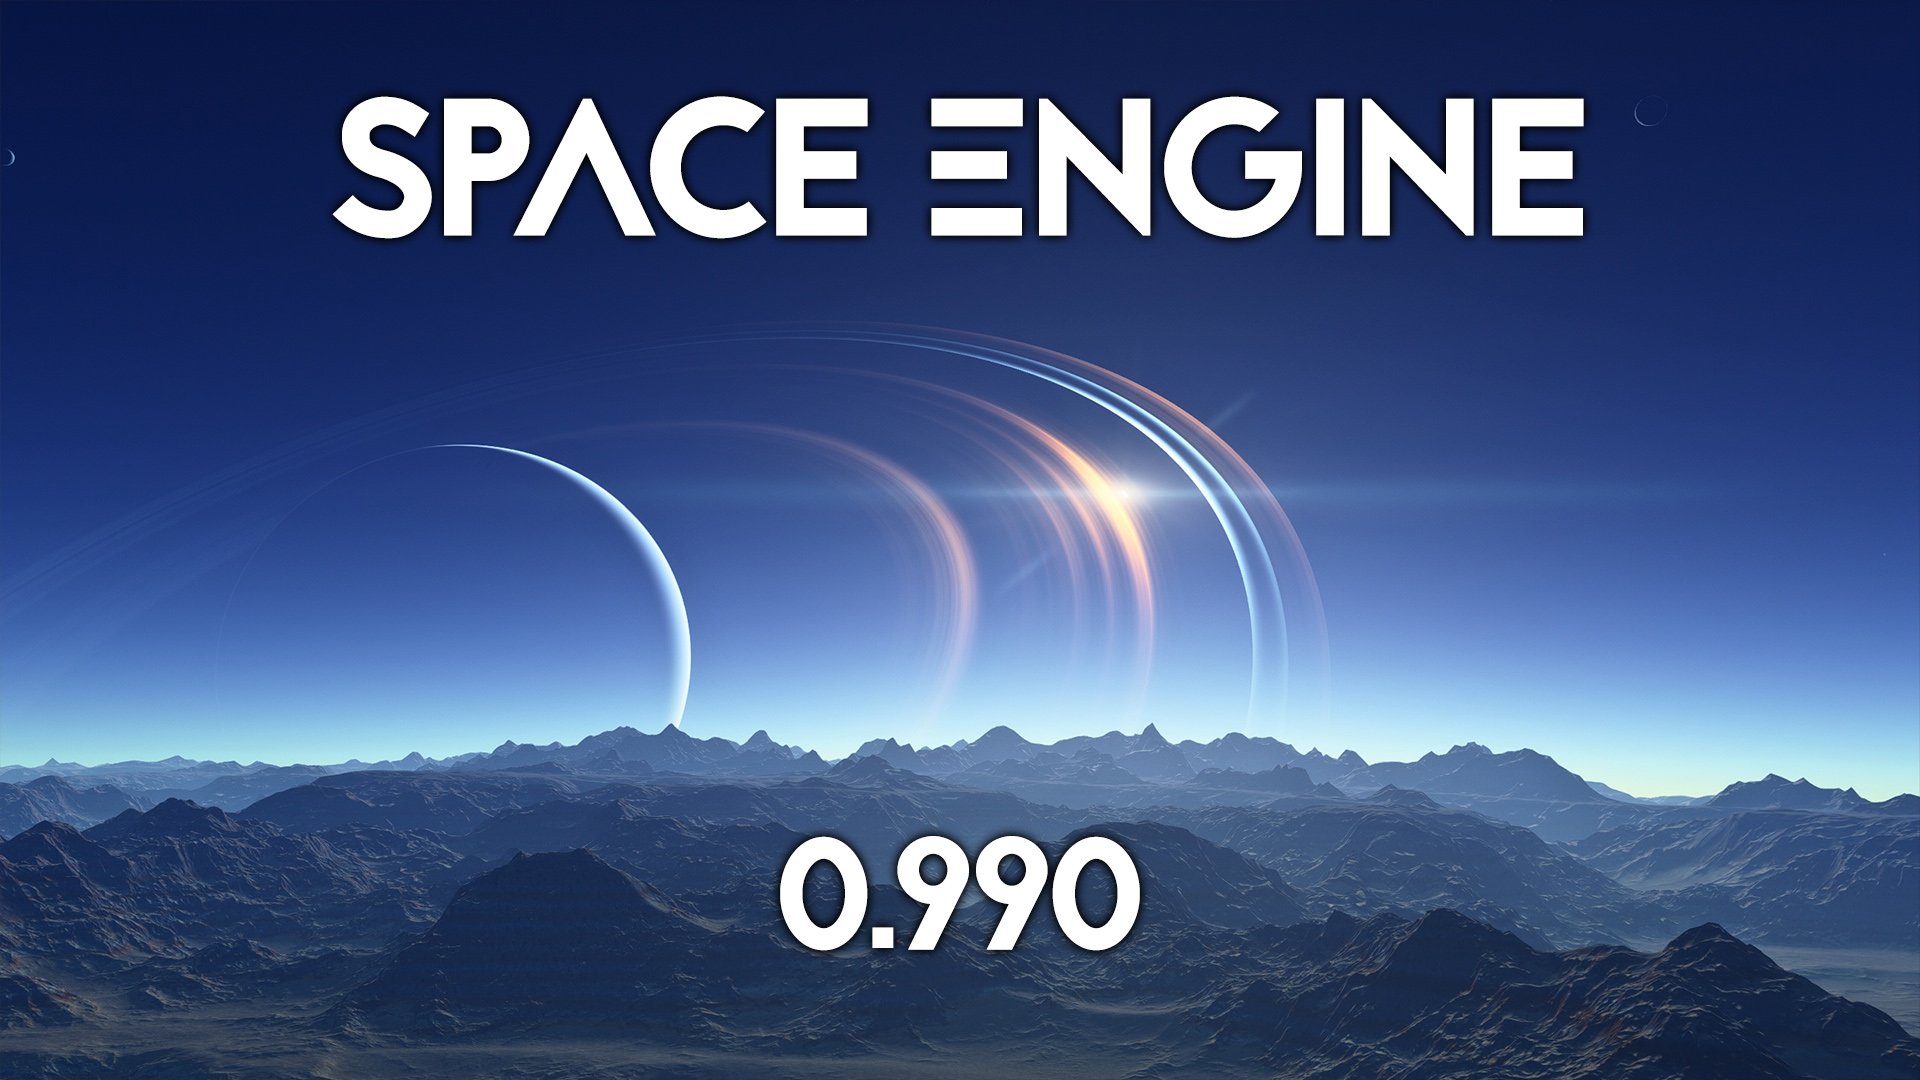 all vehicles in space engine game